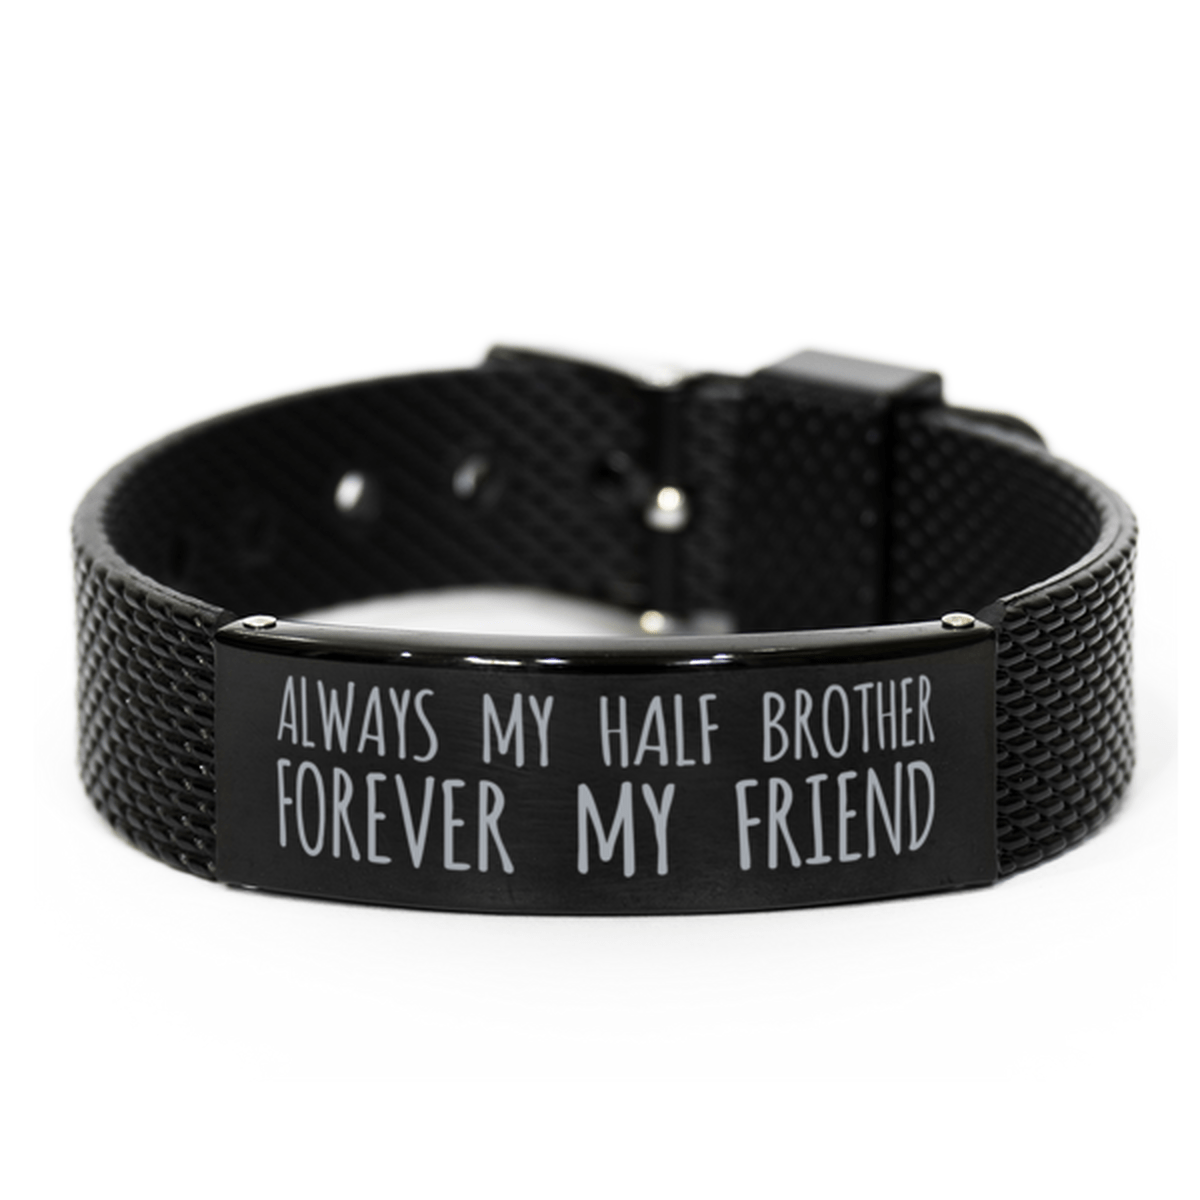 Inspirational Half Brother Black Shark Mesh Bracelet, Always My Half Brother Forever My Friend, Best Birthday Gifts for Family Friends